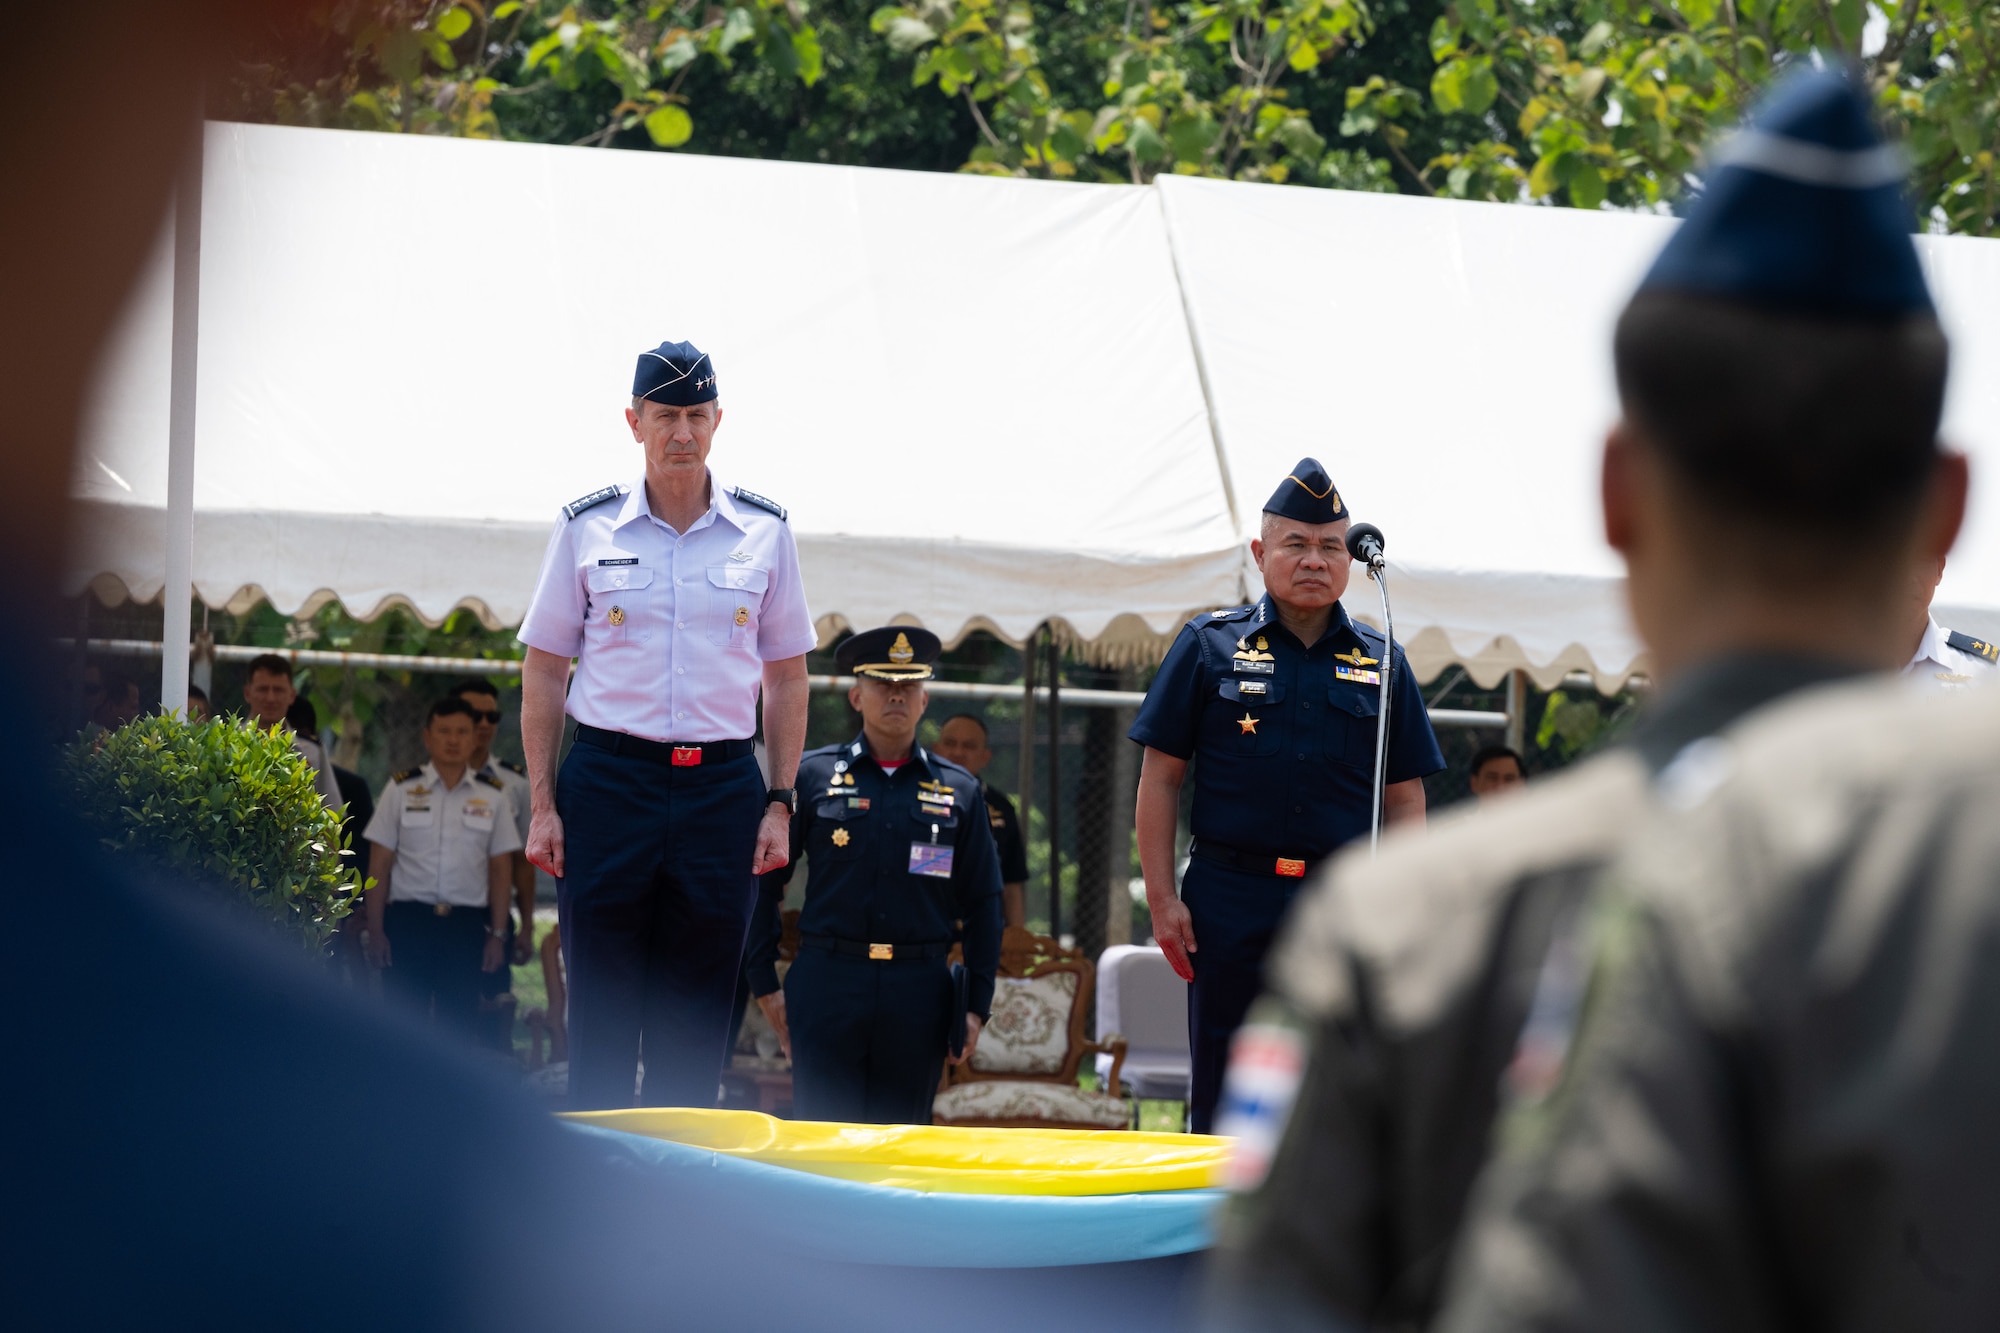 U.S. Air Force Gen. Kevin Schneider, Pacific Air Forces commander, attends the closing ceremony for Cope Tiger 2024 alongside Royal Thai Air Force Air Chief Marshal Punpakdee Pattanakul, Commander-in-Chief, at Korat Royal Thai Air Force Base, Thailand, March 29, 2024. During the exercise, many Airmen had the chance to go to a local school to play games with students while medical professionals from the Royal Thai Air Force and Republic of Singapore Air Force rendered care to locals with support from the U.S. Air Force medical team. (U.S. Air Force photo by Tech. Sgt. Hailey Haux)